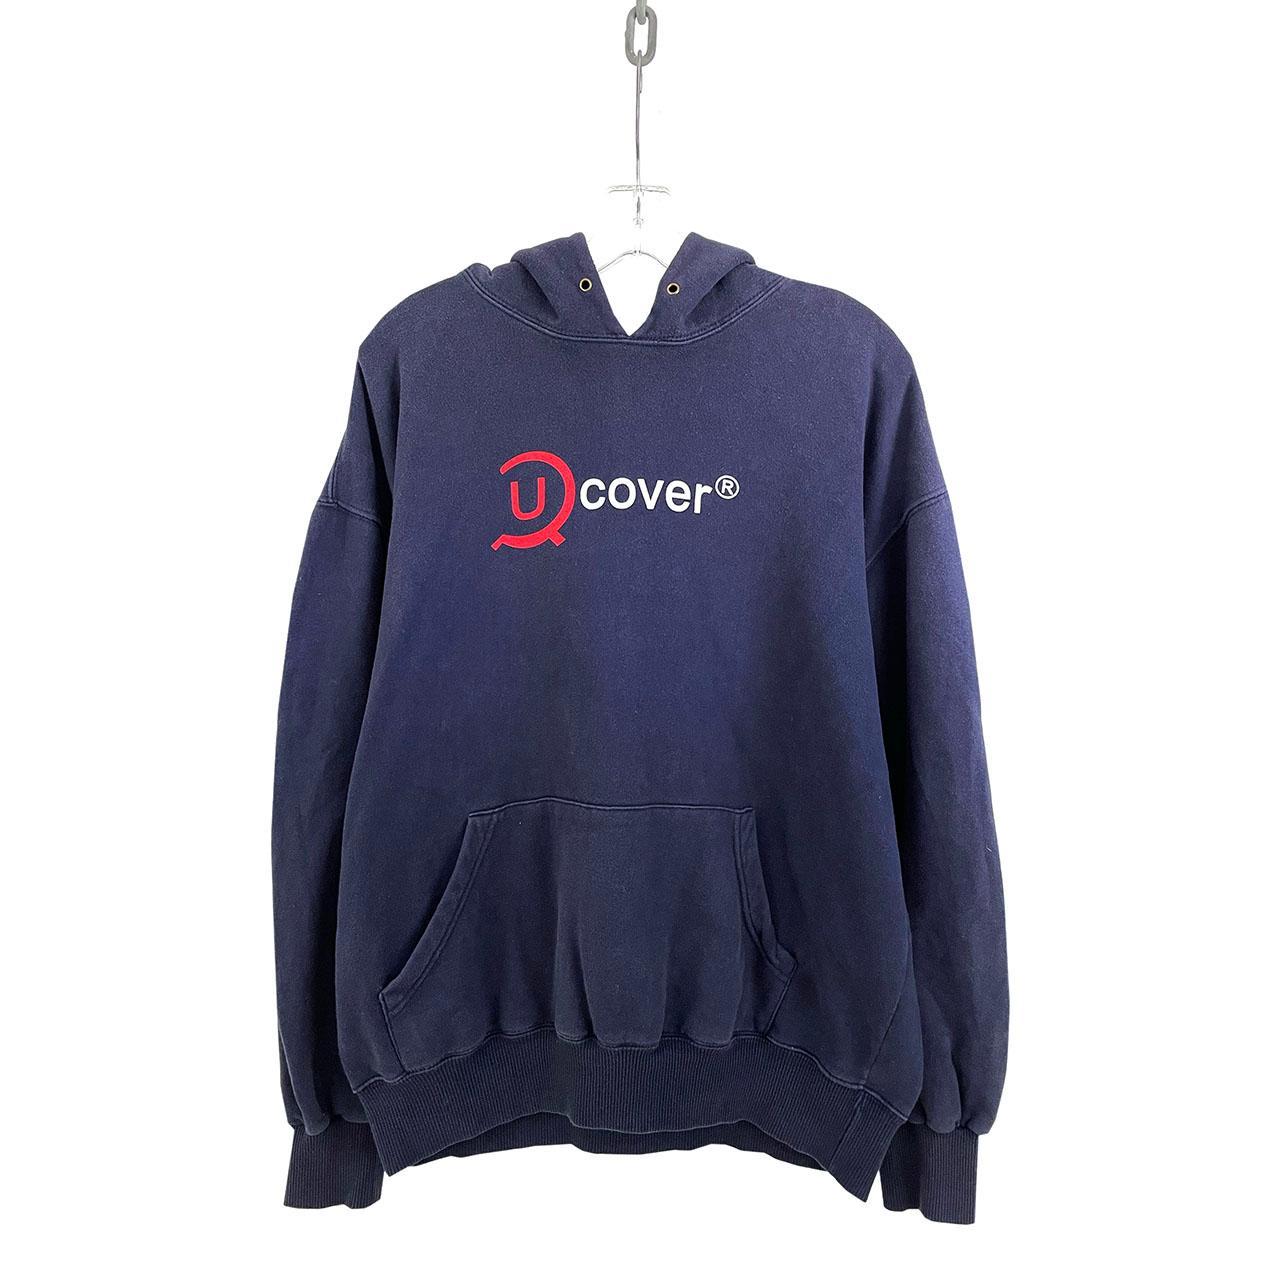 Undercover × Wtaps 90's Hoodie, No tagged size but...